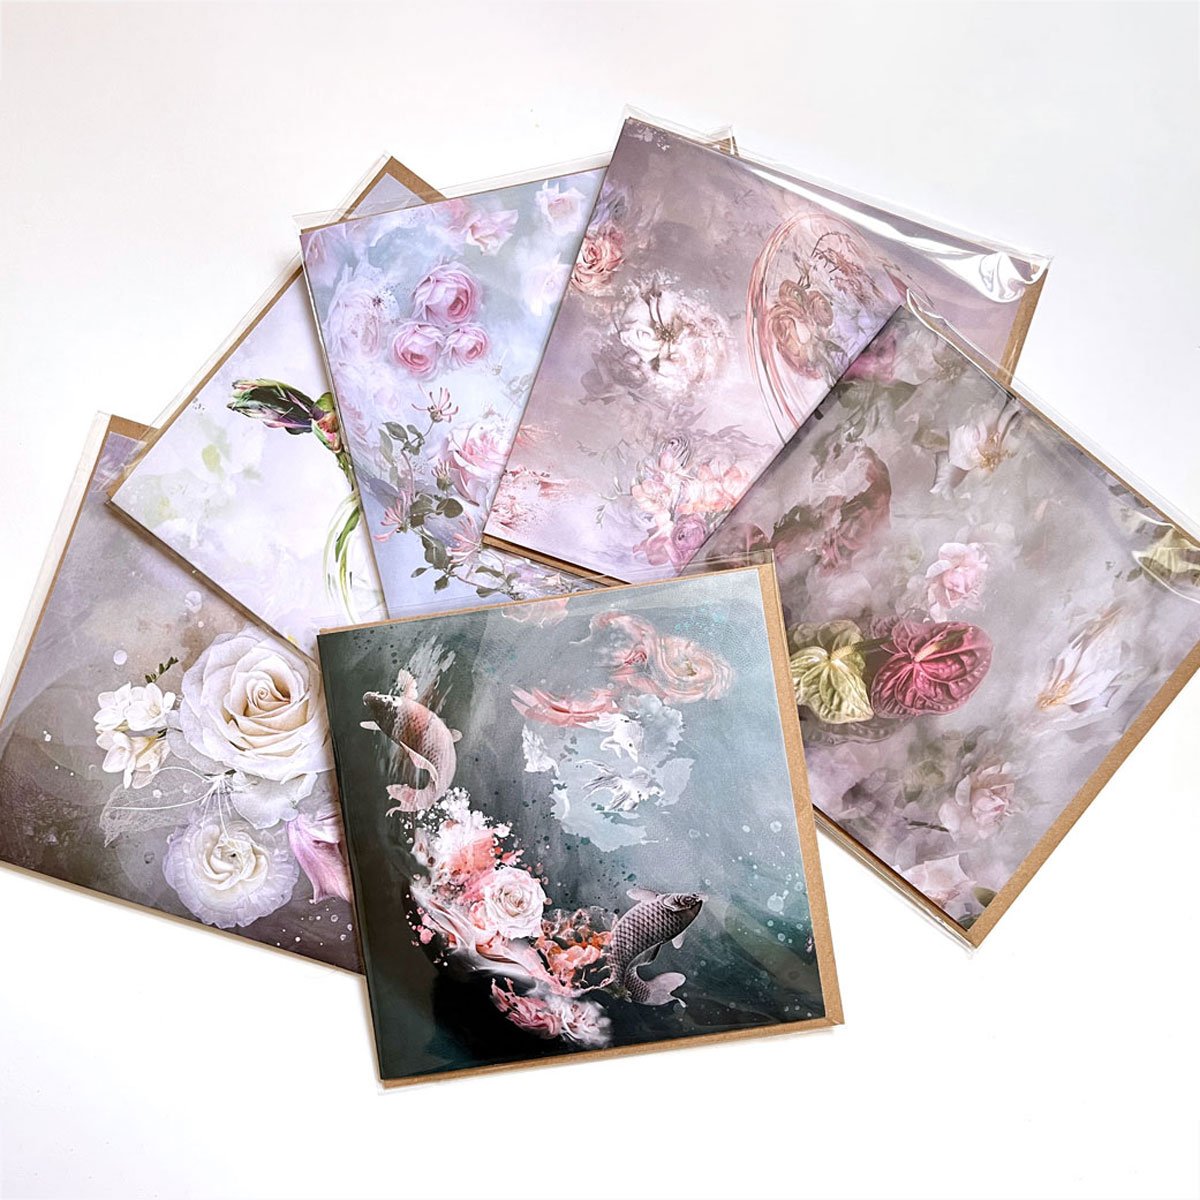 Floral greetings cards by kirsteen titchener